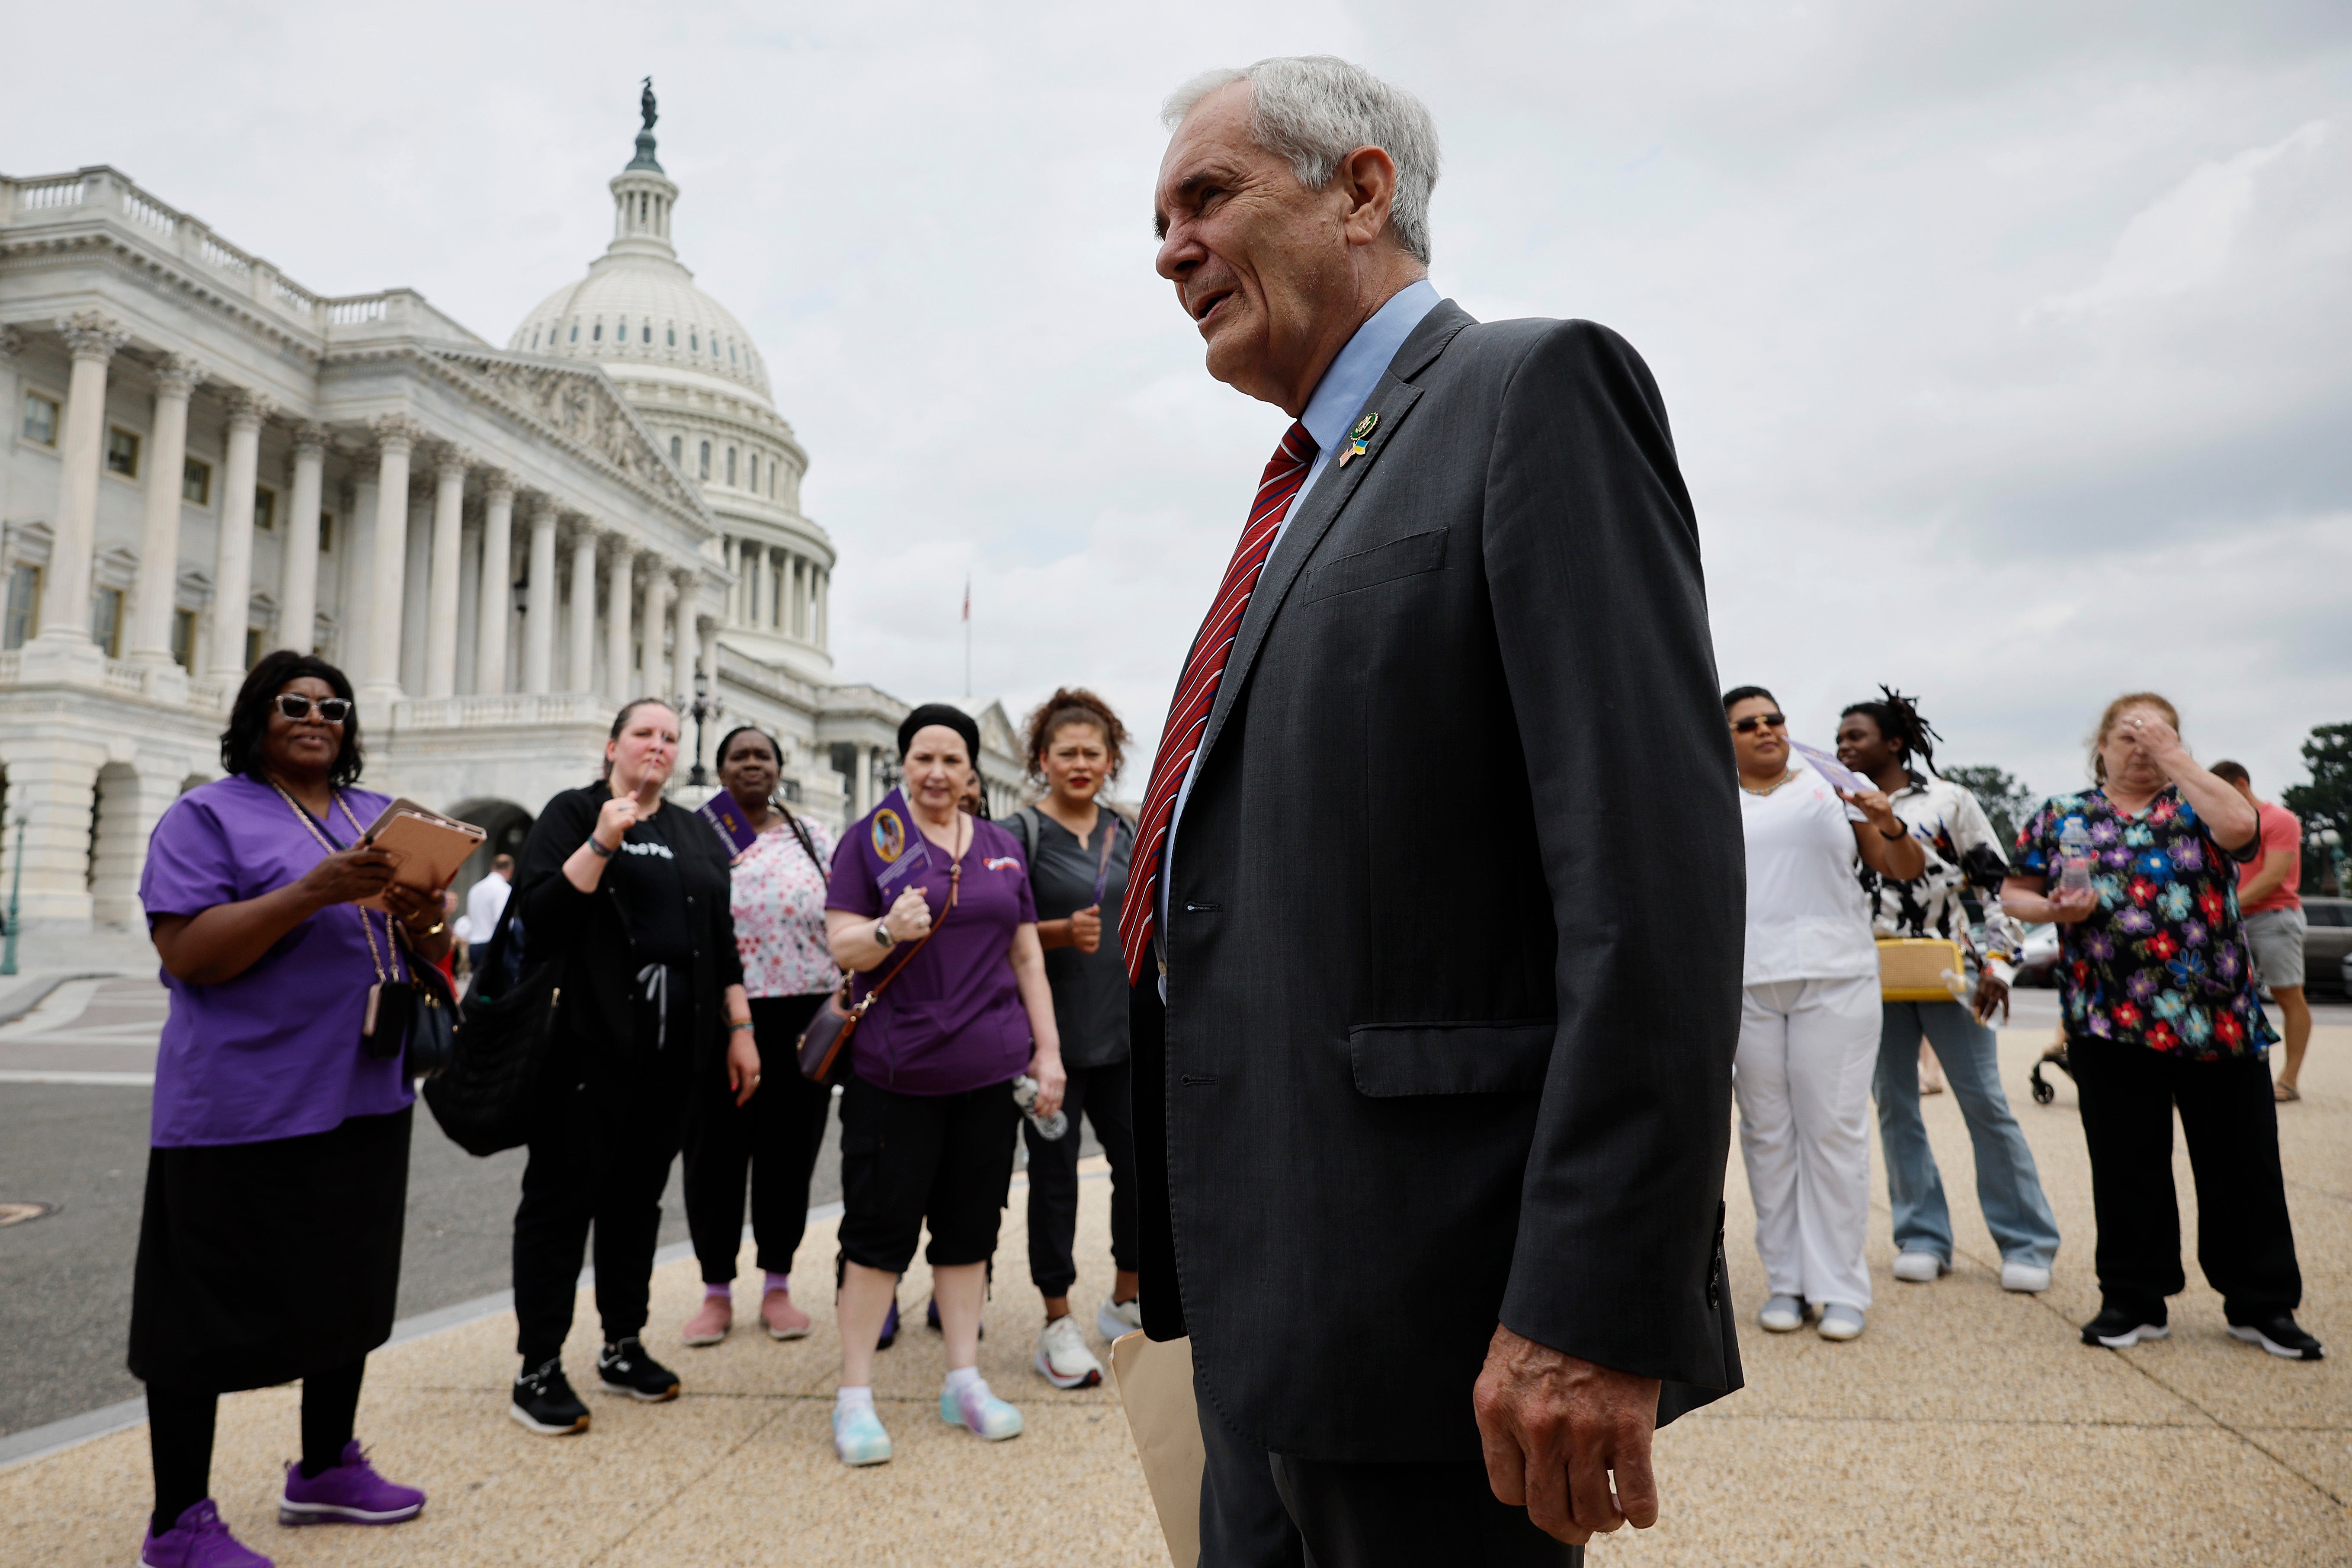 Democratic congressman Lloyd Doggett joins members of the Service Employees International Union in Washington DC on June 5. He became the first sitting Democratic member of Congress to call on Joe Biden to drop out of the presidential race on July 2.